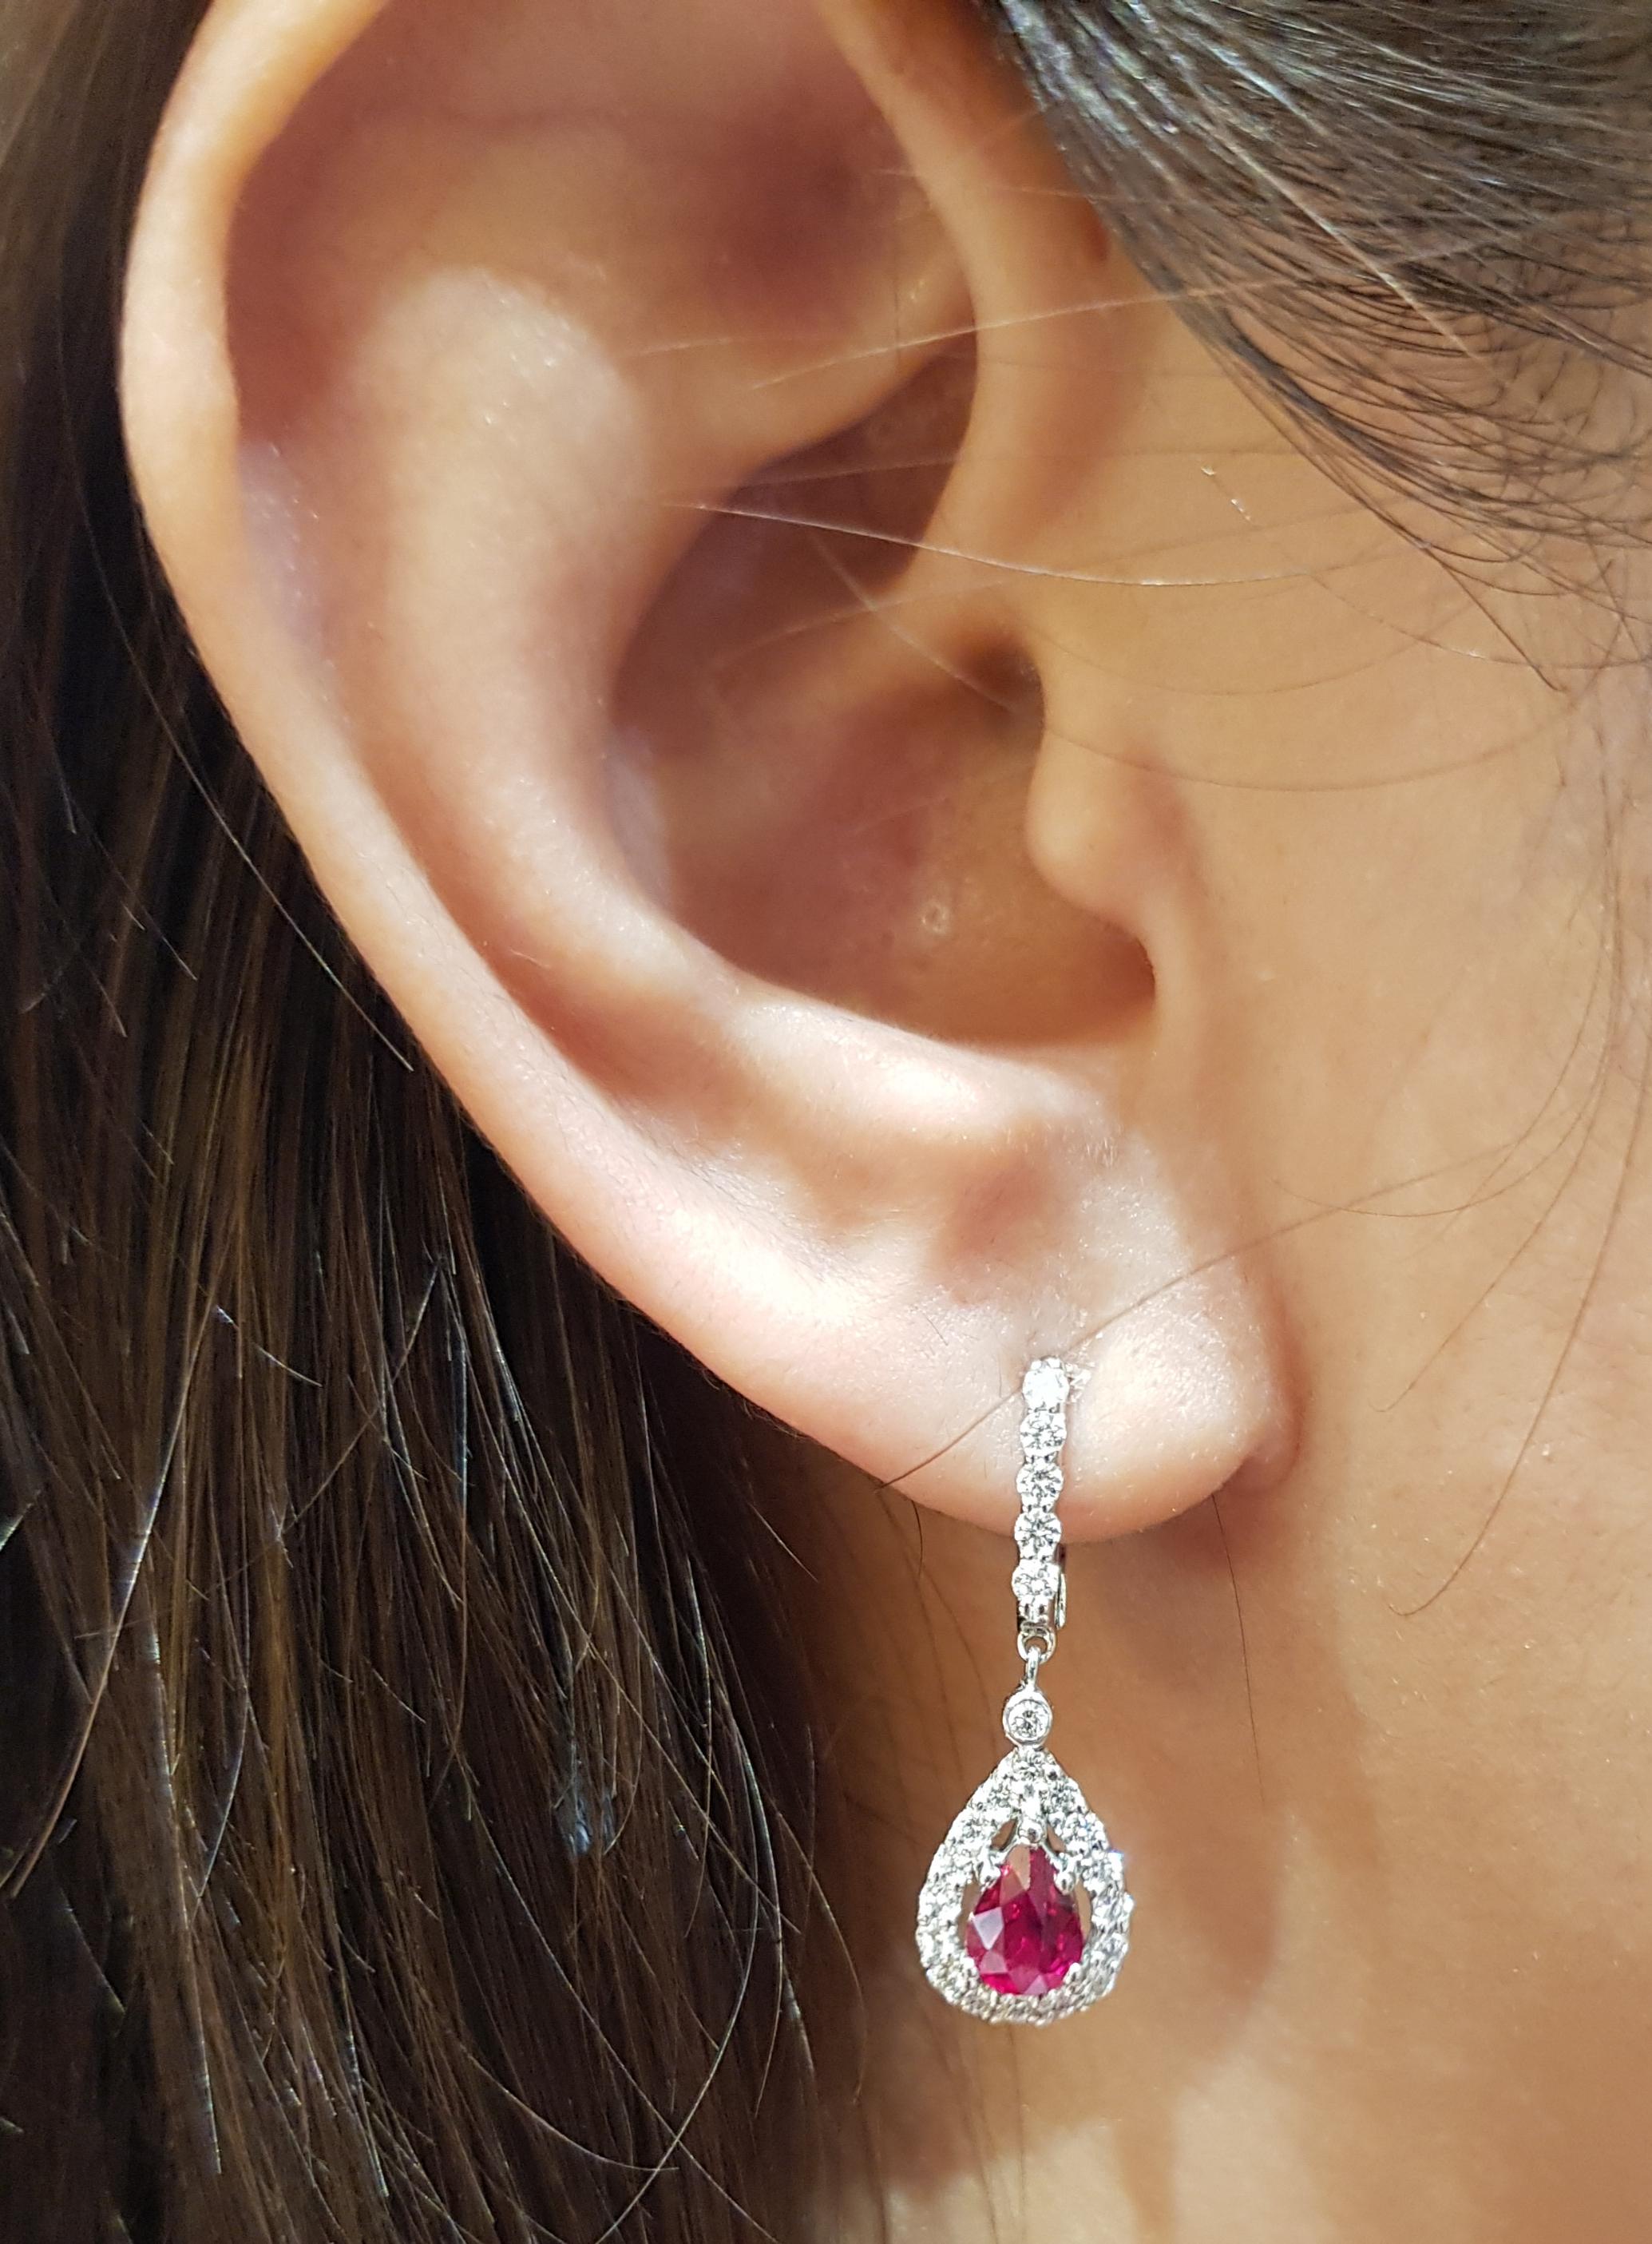 Ruby 2.95 carats with Diamond 0.43 carat Earrings set in 18 Karat White Gold Settings

Width:  0.9 cm 
Length: 3.0 cm
Total Weight: 4.37 grams

